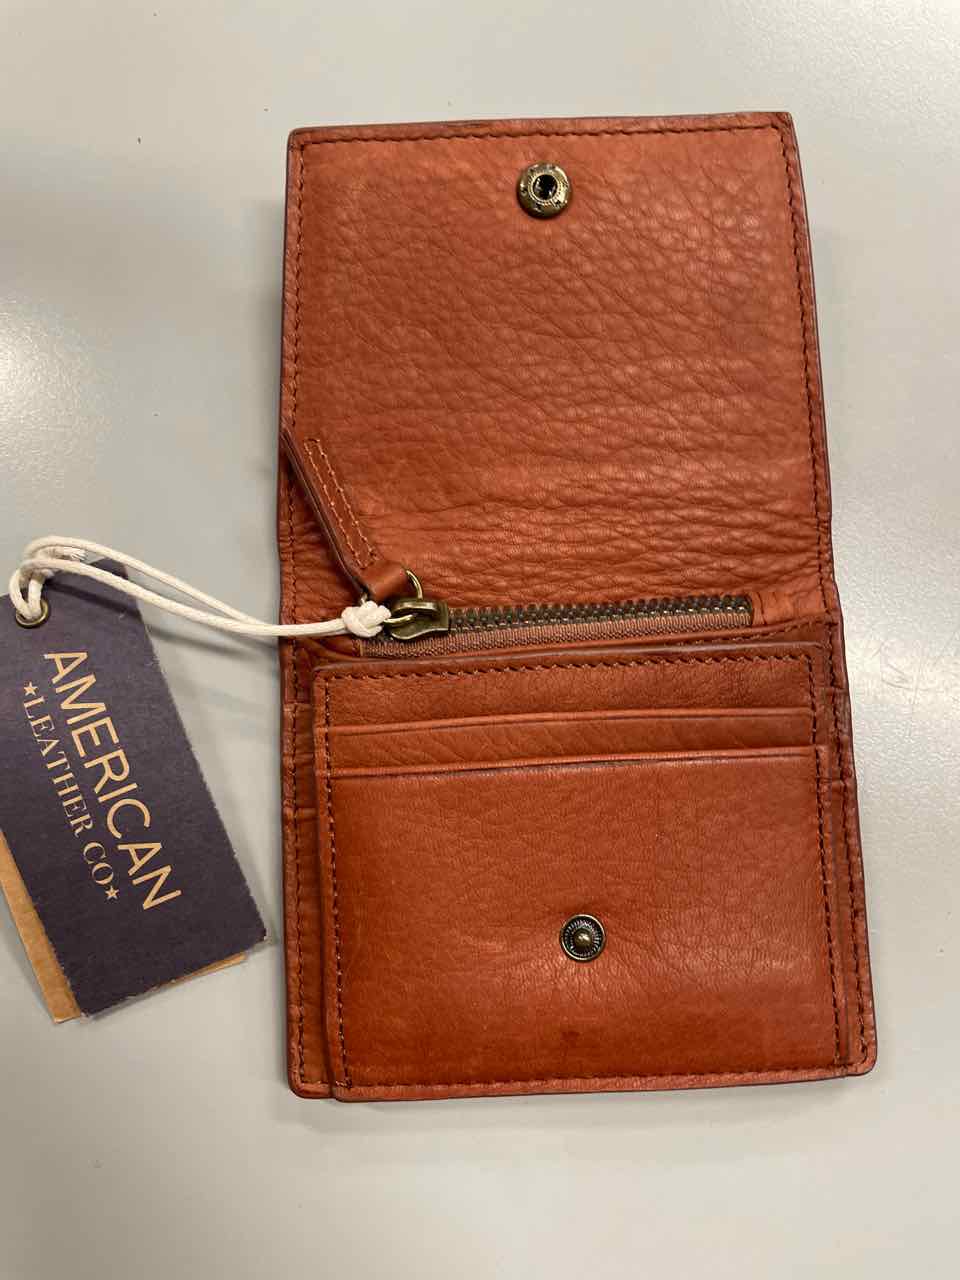 Accessories - American Leather Co Wallet